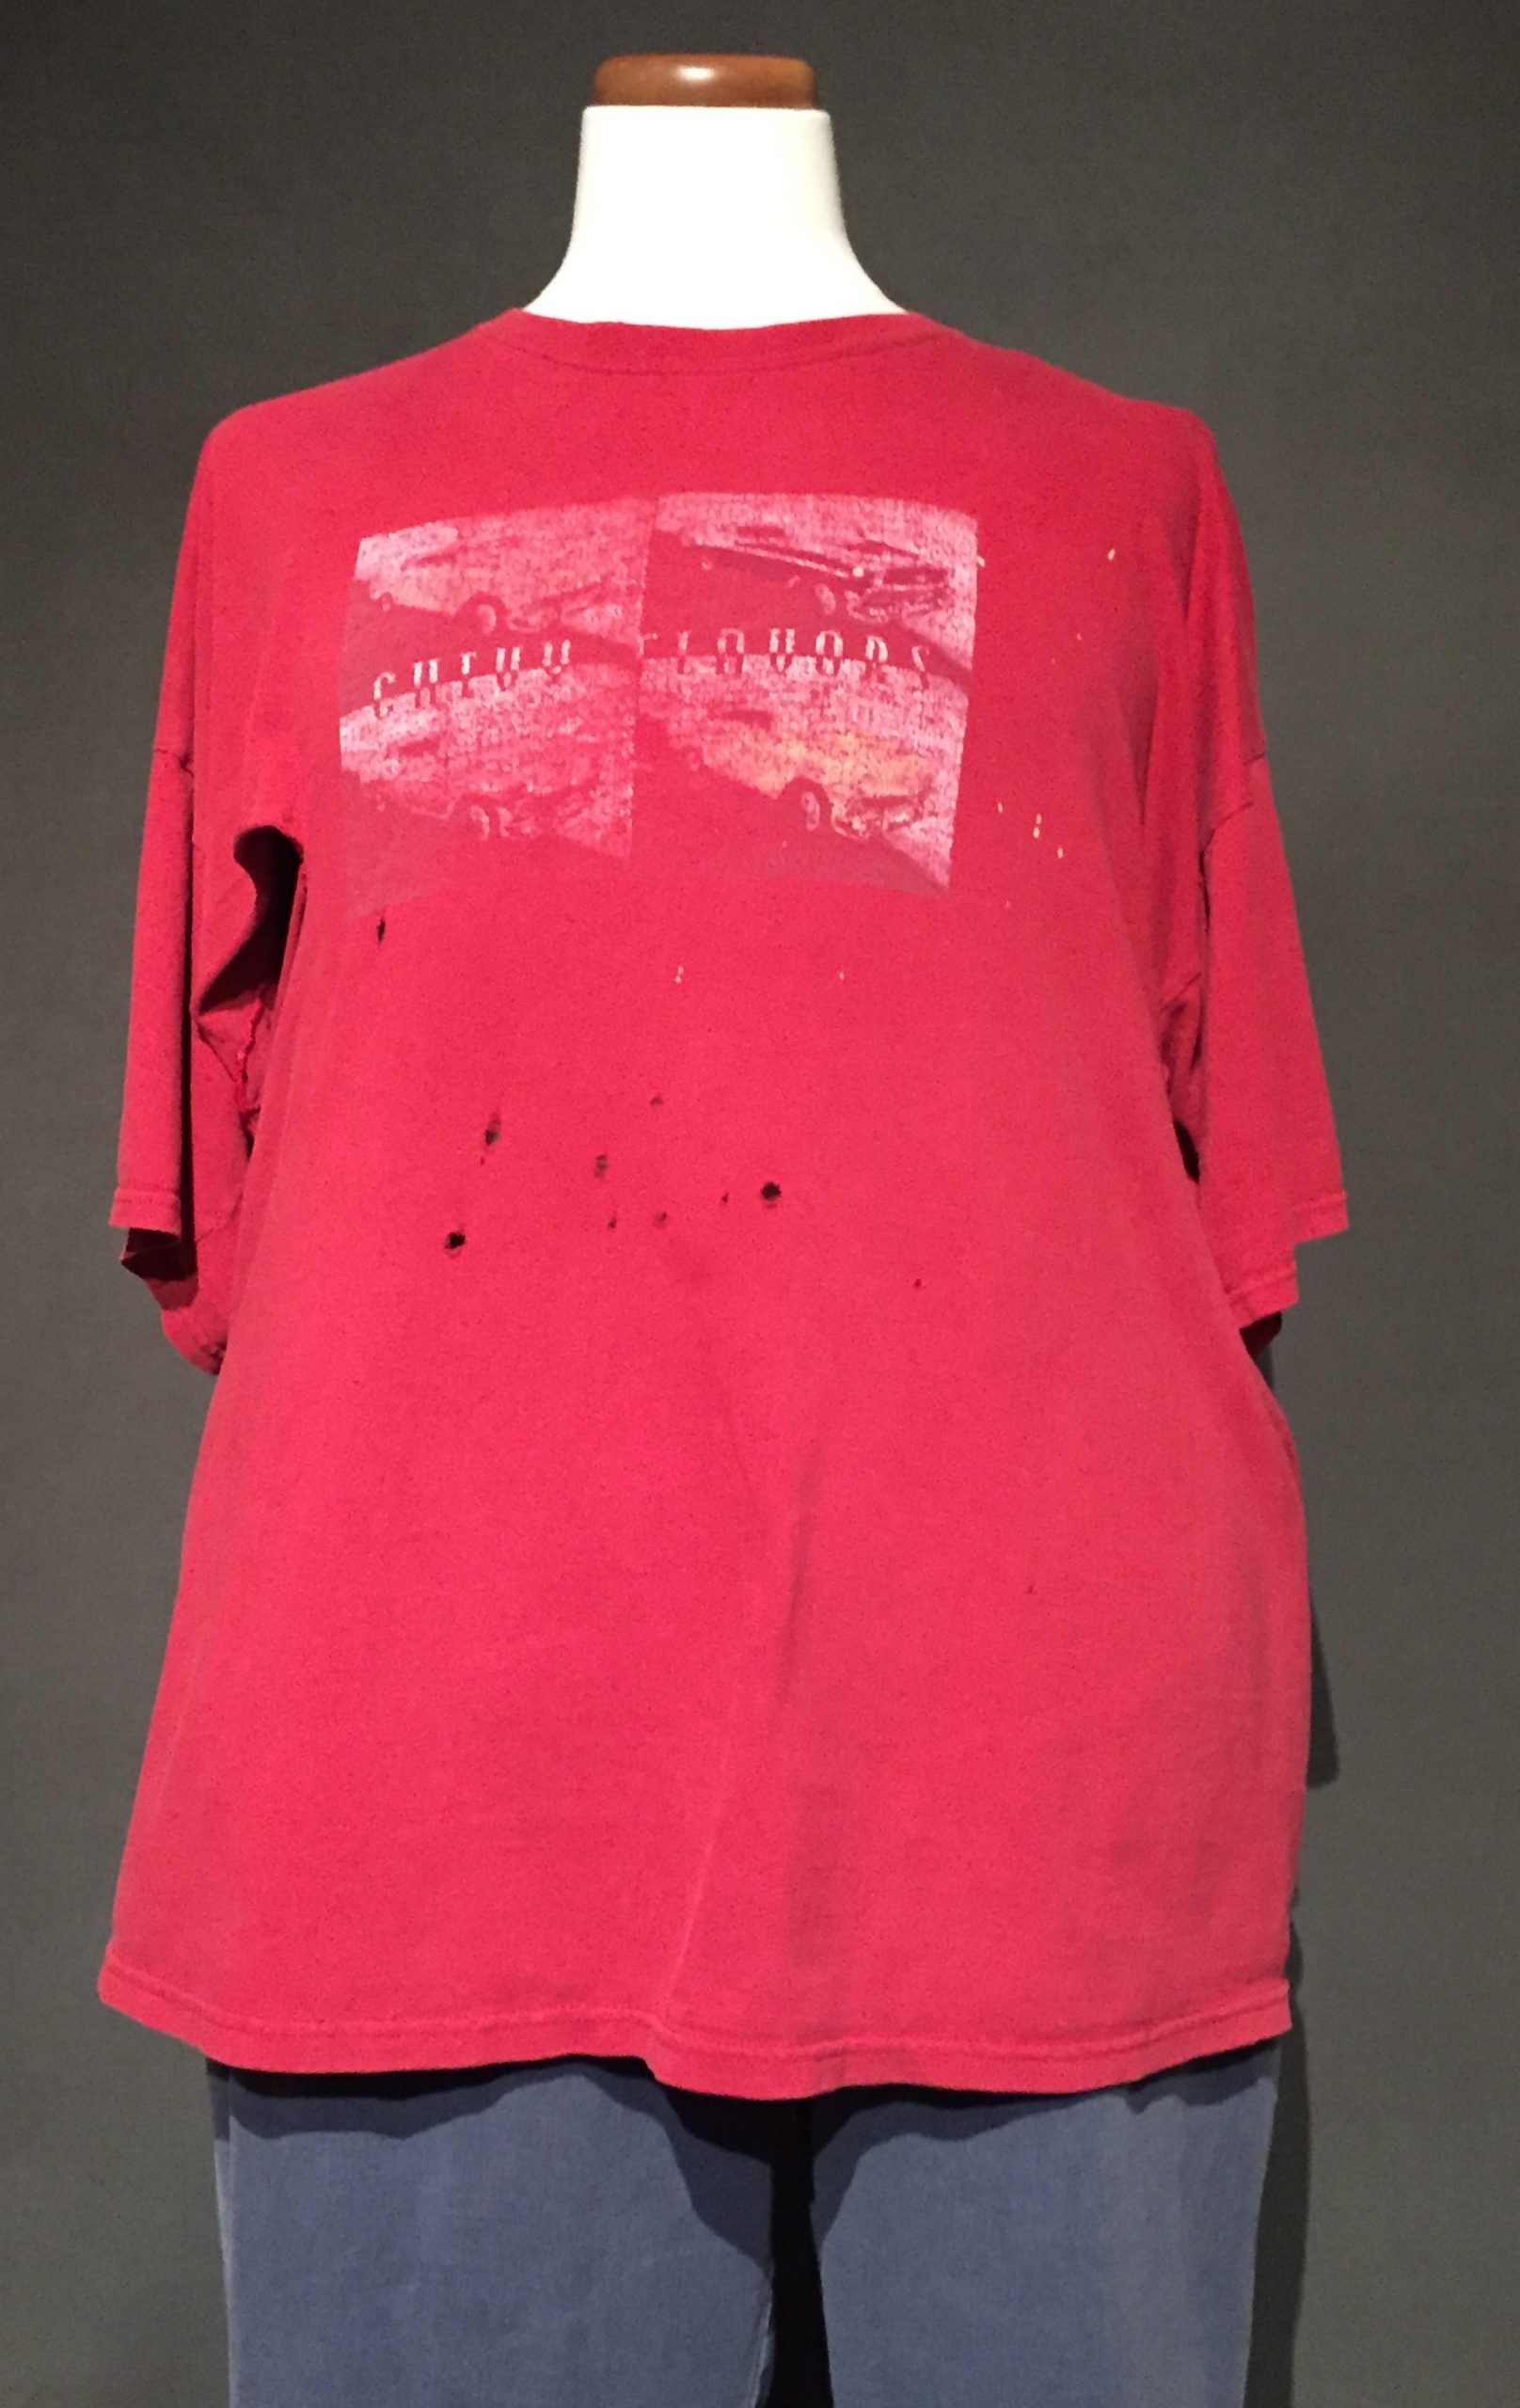 Red t-shirt with photos of cars, text reads: "Chevy Flavors"